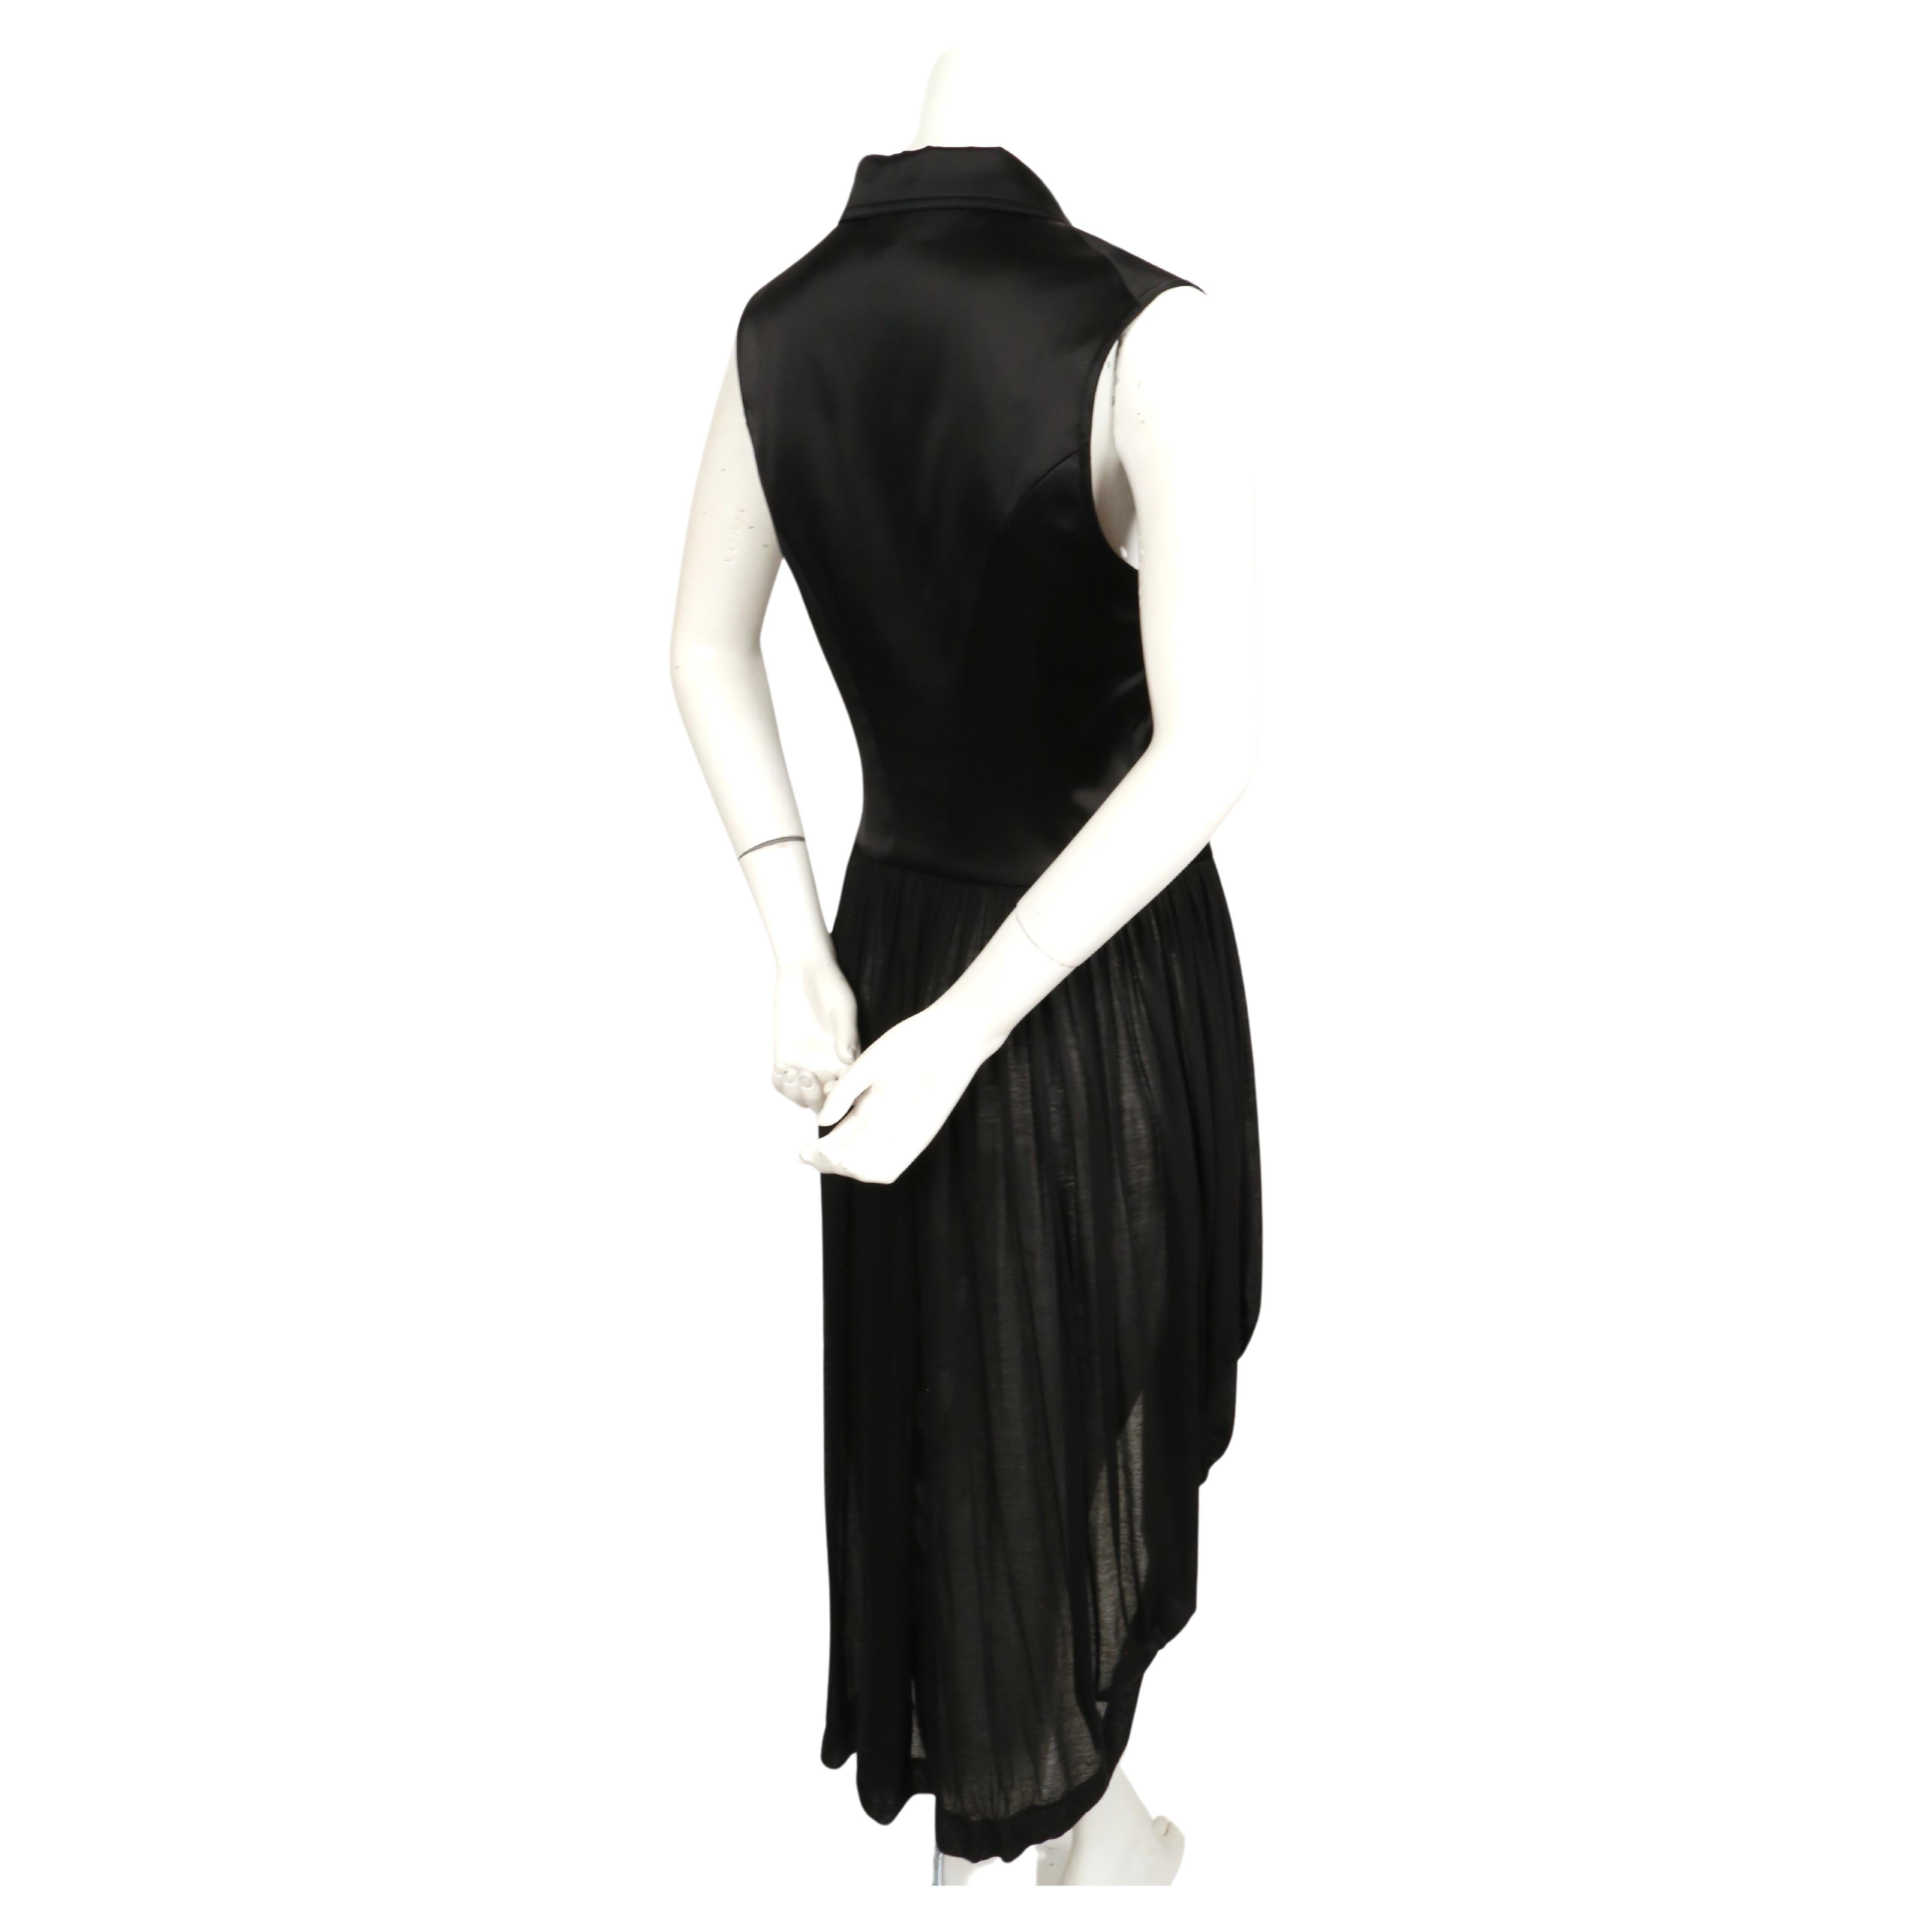 Y-3 YOHJI YAMAMOTO black satin dress with sheer skirt In Good Condition For Sale In San Fransisco, CA